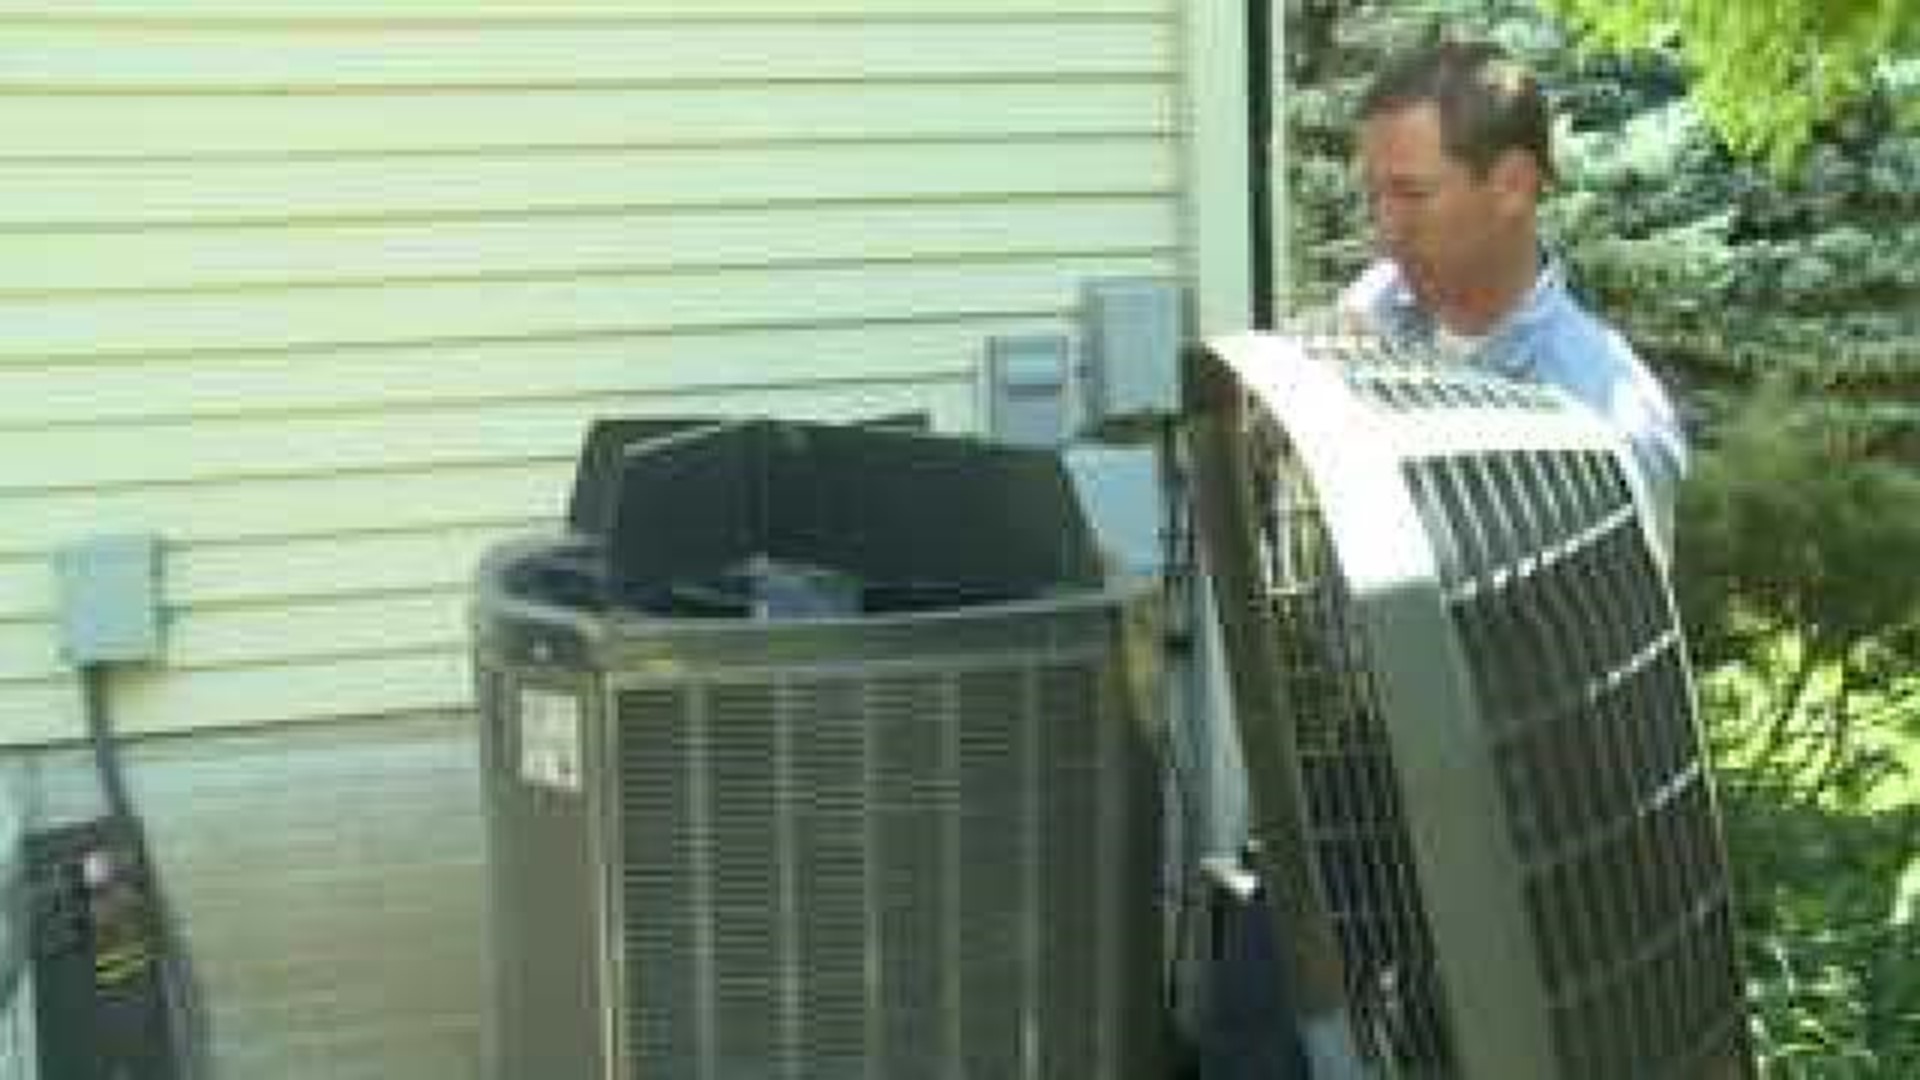 A/C repairmen on standby